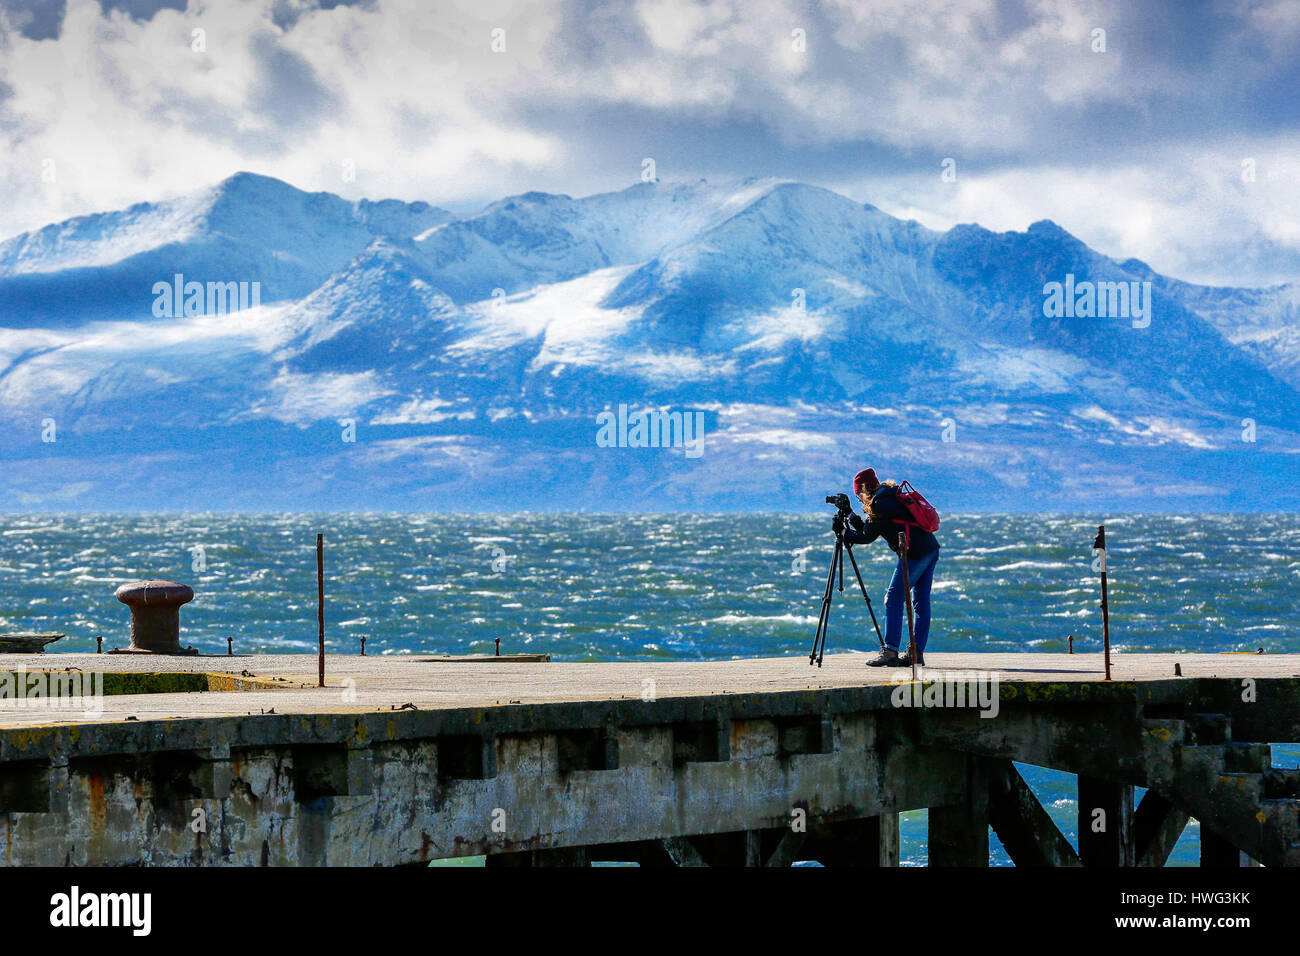 Portencross, Ayrshire, UK. 21st March 2017. Strong cold winds at Portencross castle on the Firth of Clyde and a heavy snow fall on Goatfell mountain on the Island of Arran, aren't enough to put off the hardiest of photographers. Credit: Findlay/Alamy Live News Stock Photo